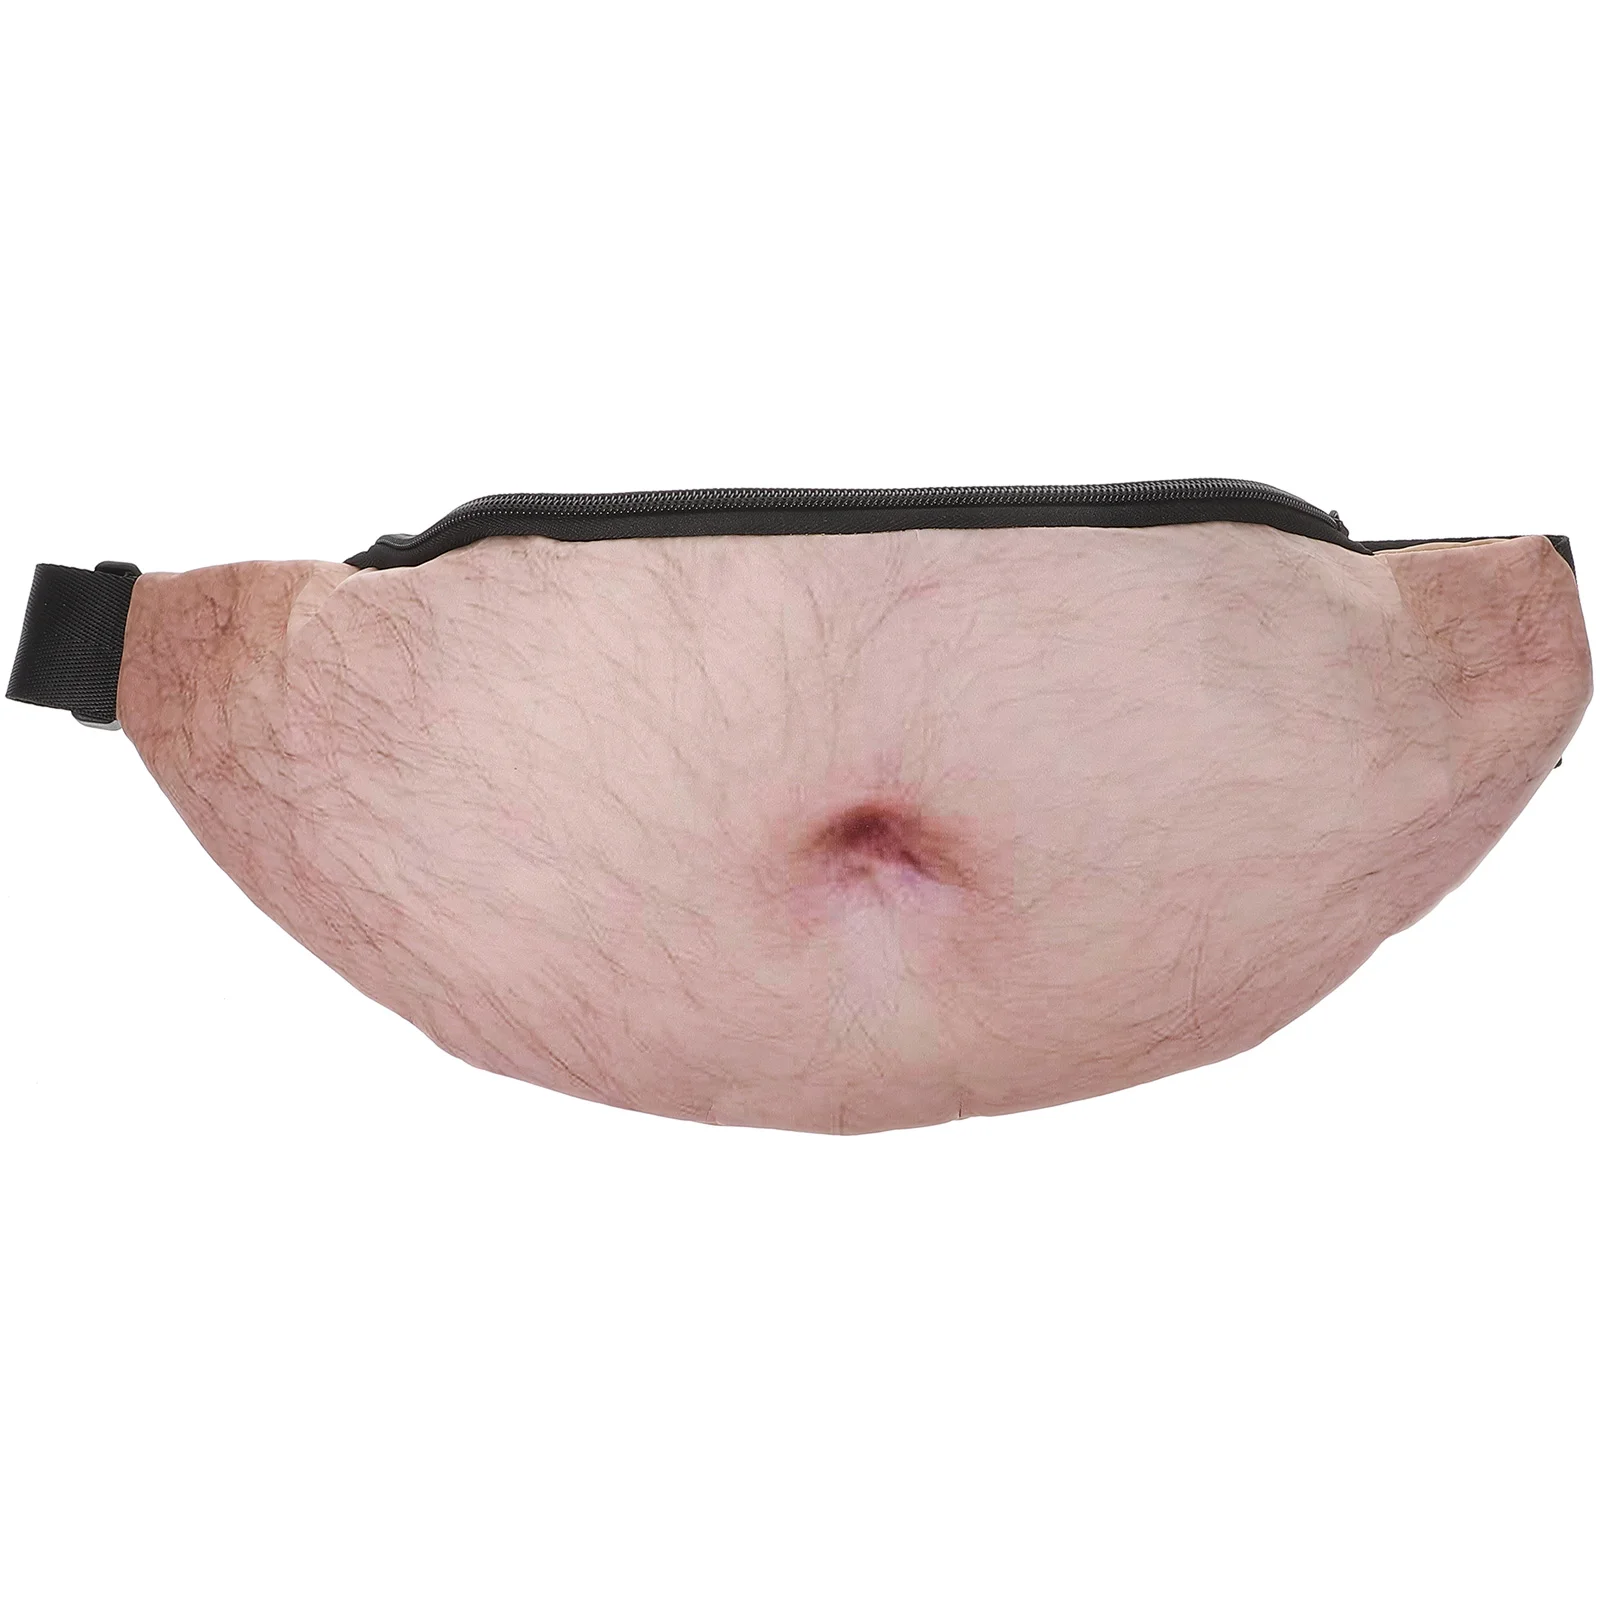 Universal Flesh Colored Beer Fat Belly Waist Bags For Iphone